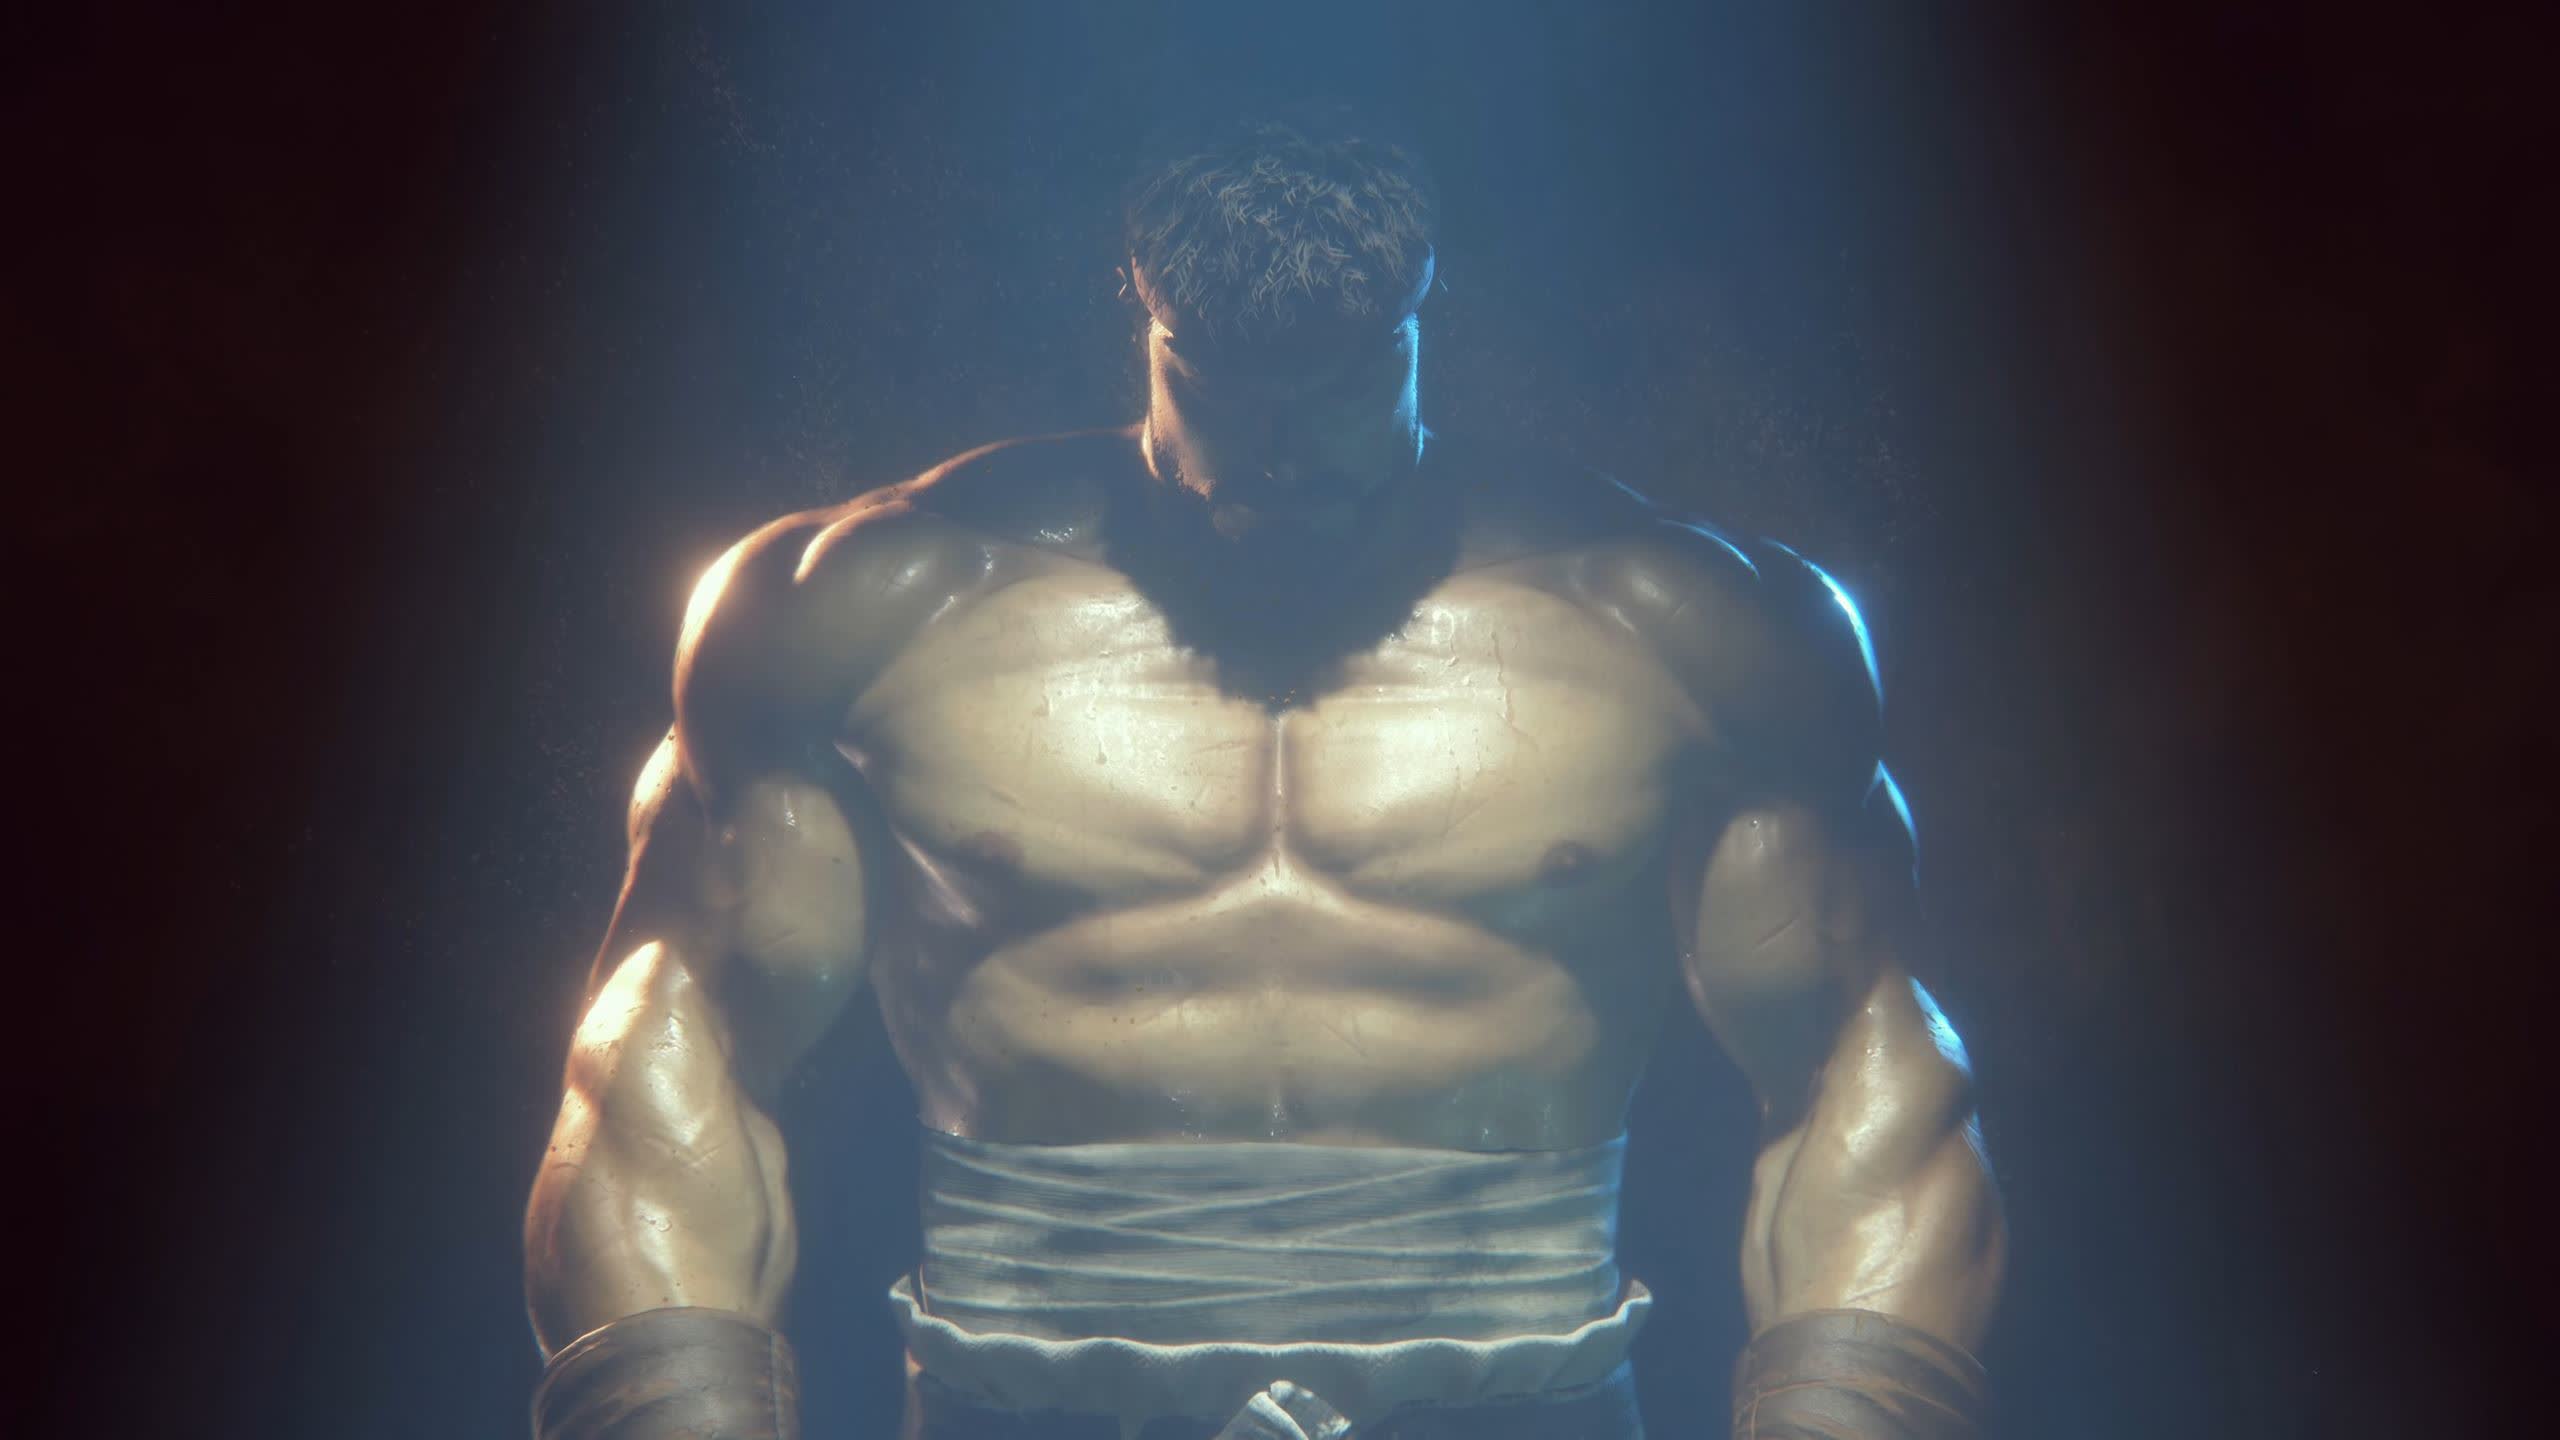 Capcom announces Street Fighter 6 with an in-engine teaser trailer